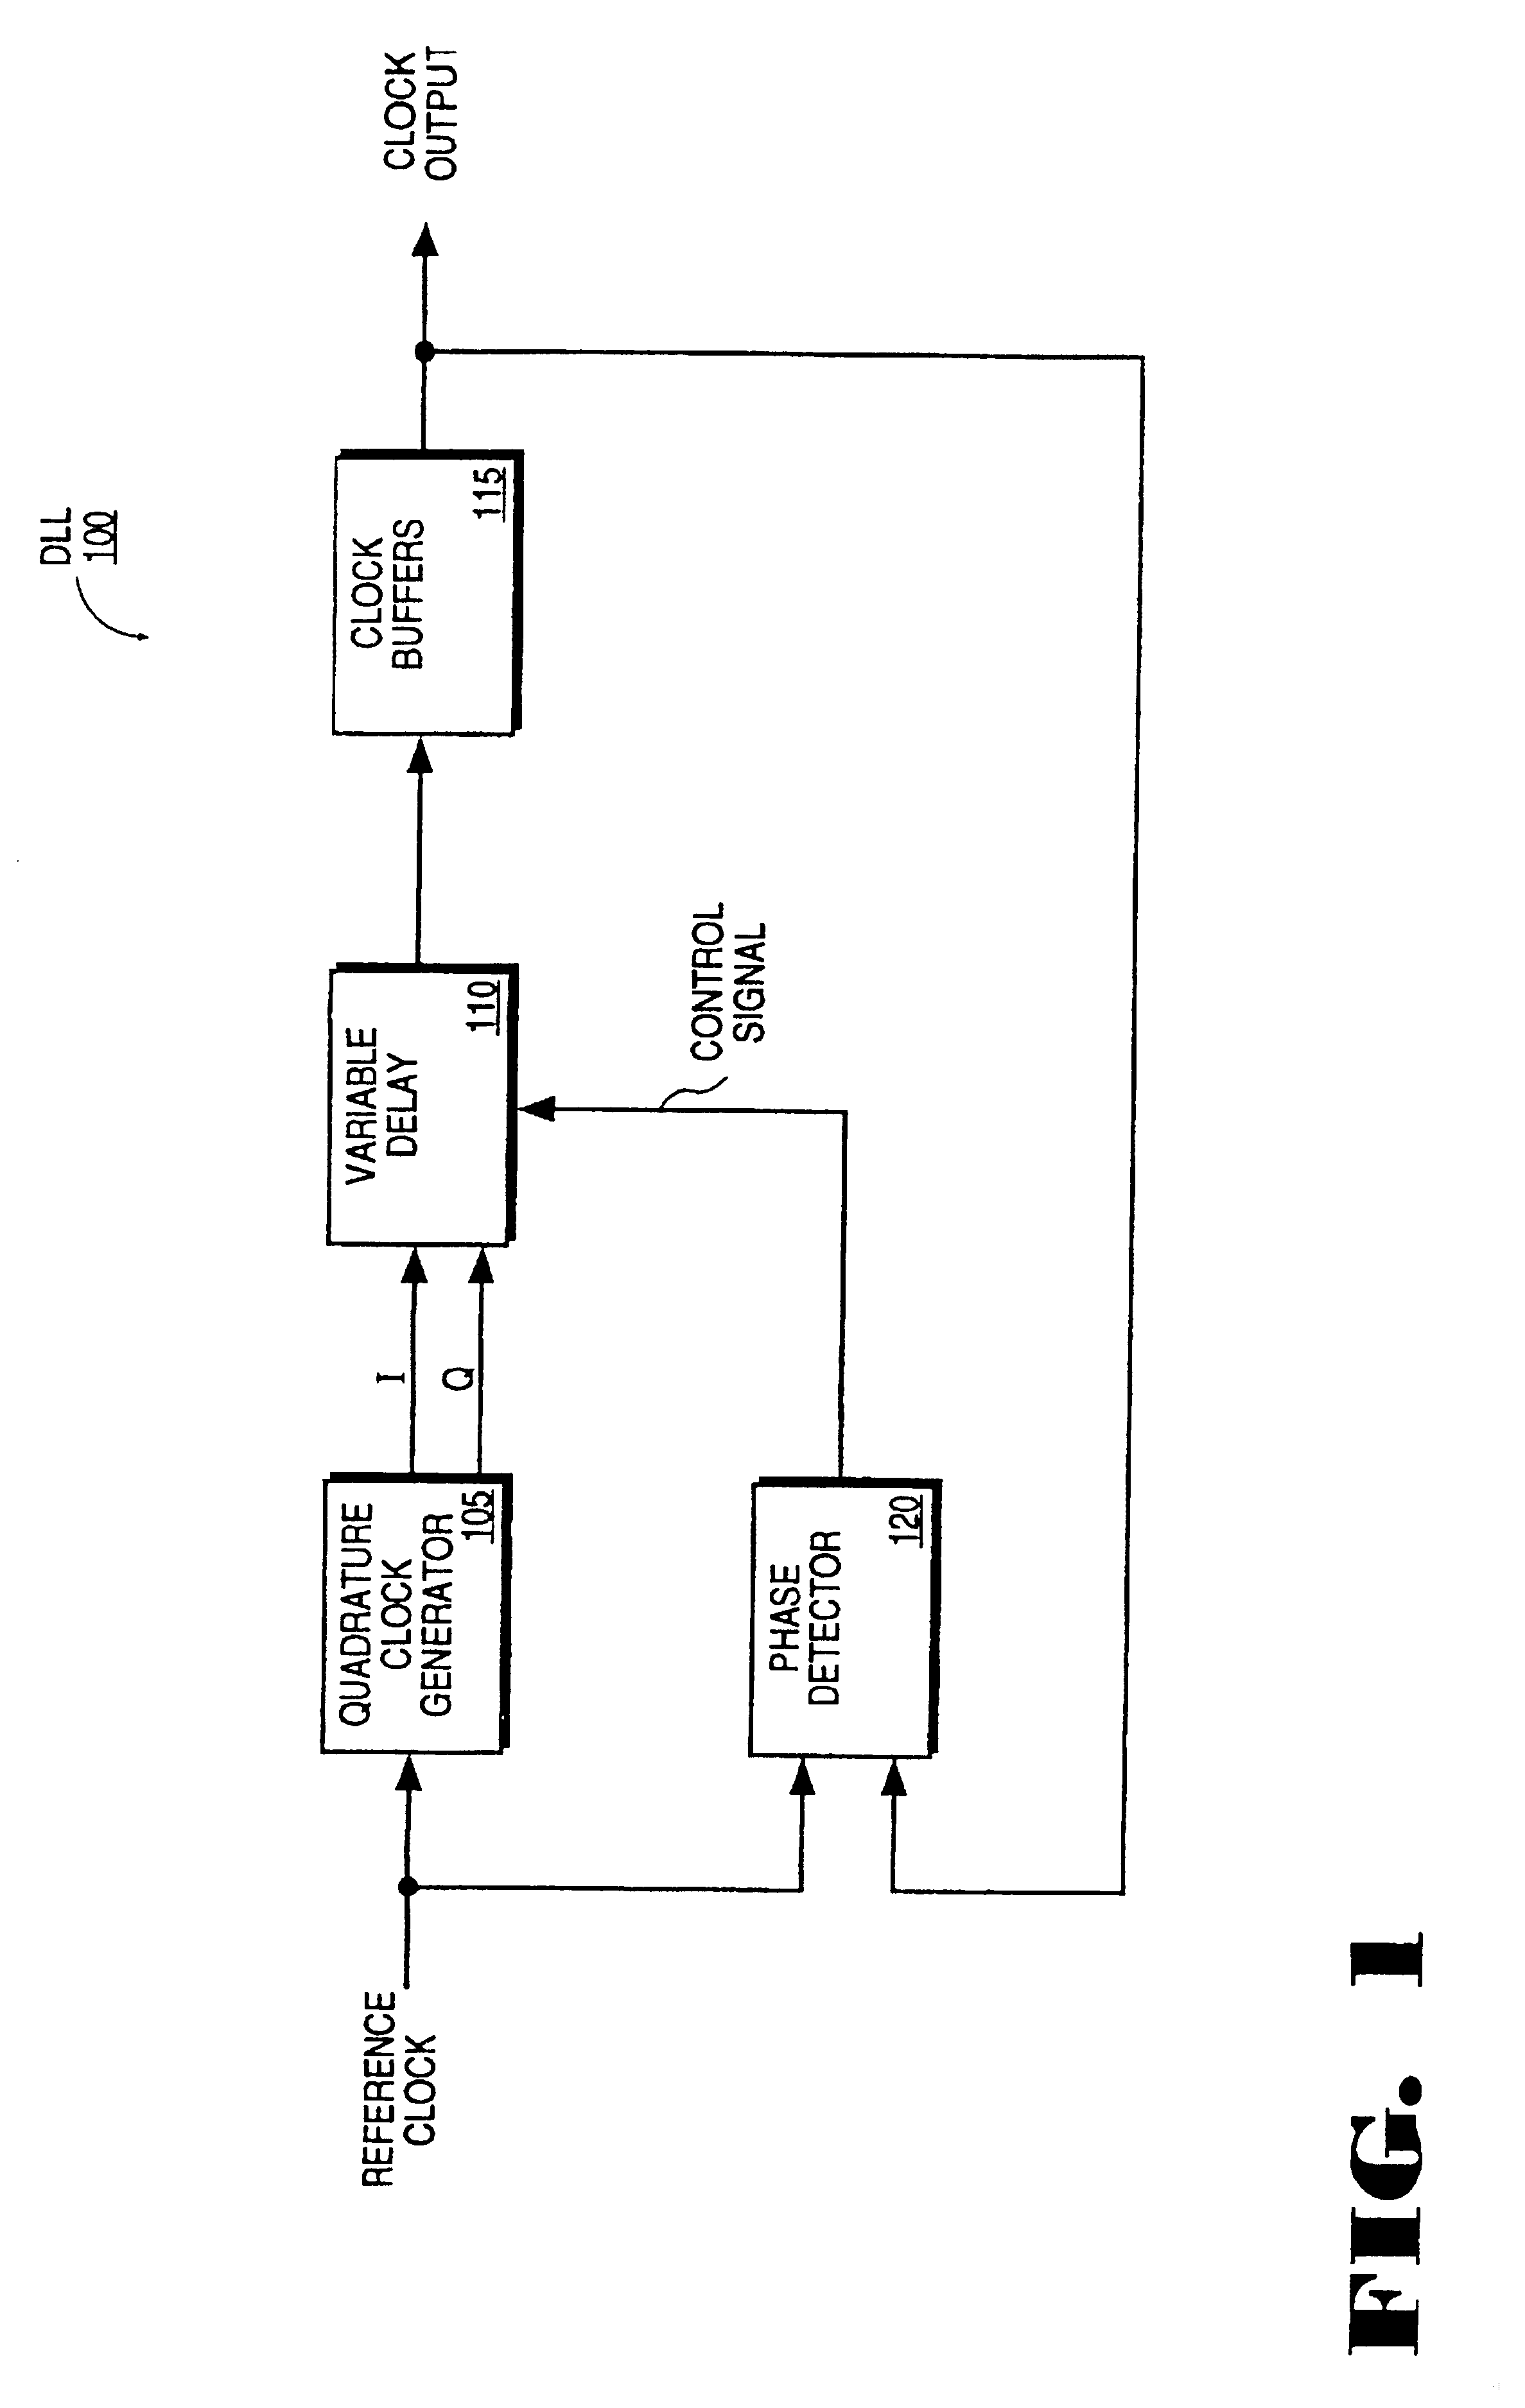 At frequency phase shifting circuit for use in a quadrature clock generator